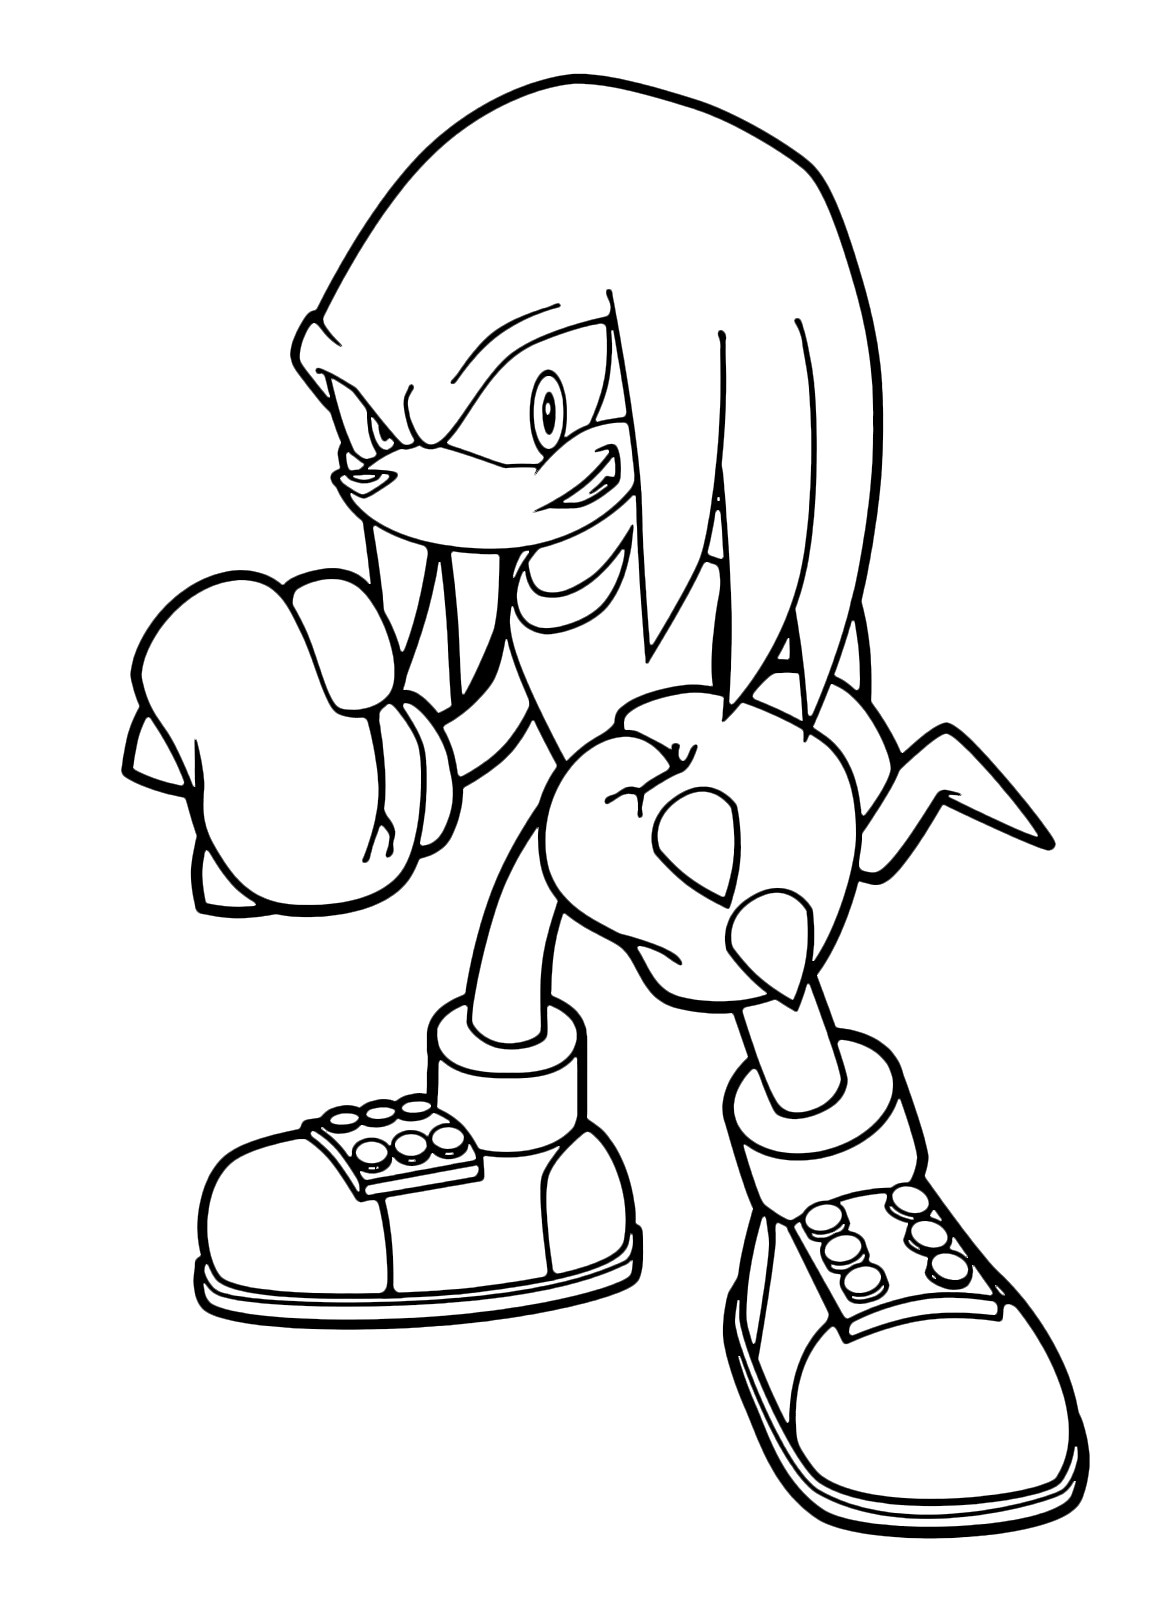 Knuckles The Echidna Smiling Coloring Page - Free Printable Coloring